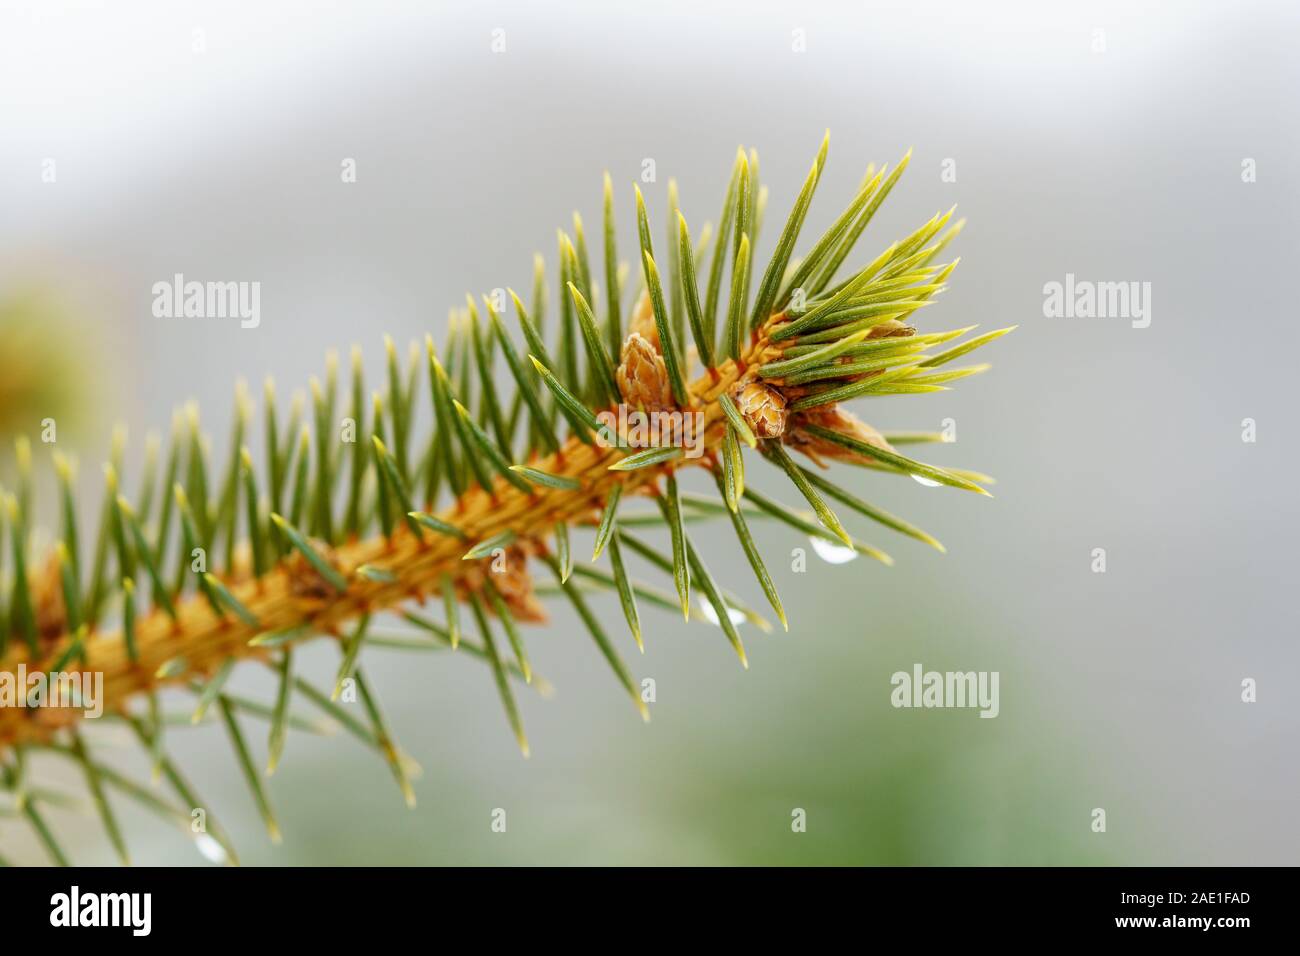 Tip of a branch of a European spruce with young pine cones and raindrops on the green needles in front of blurred white and gray background, side view Stock Photo